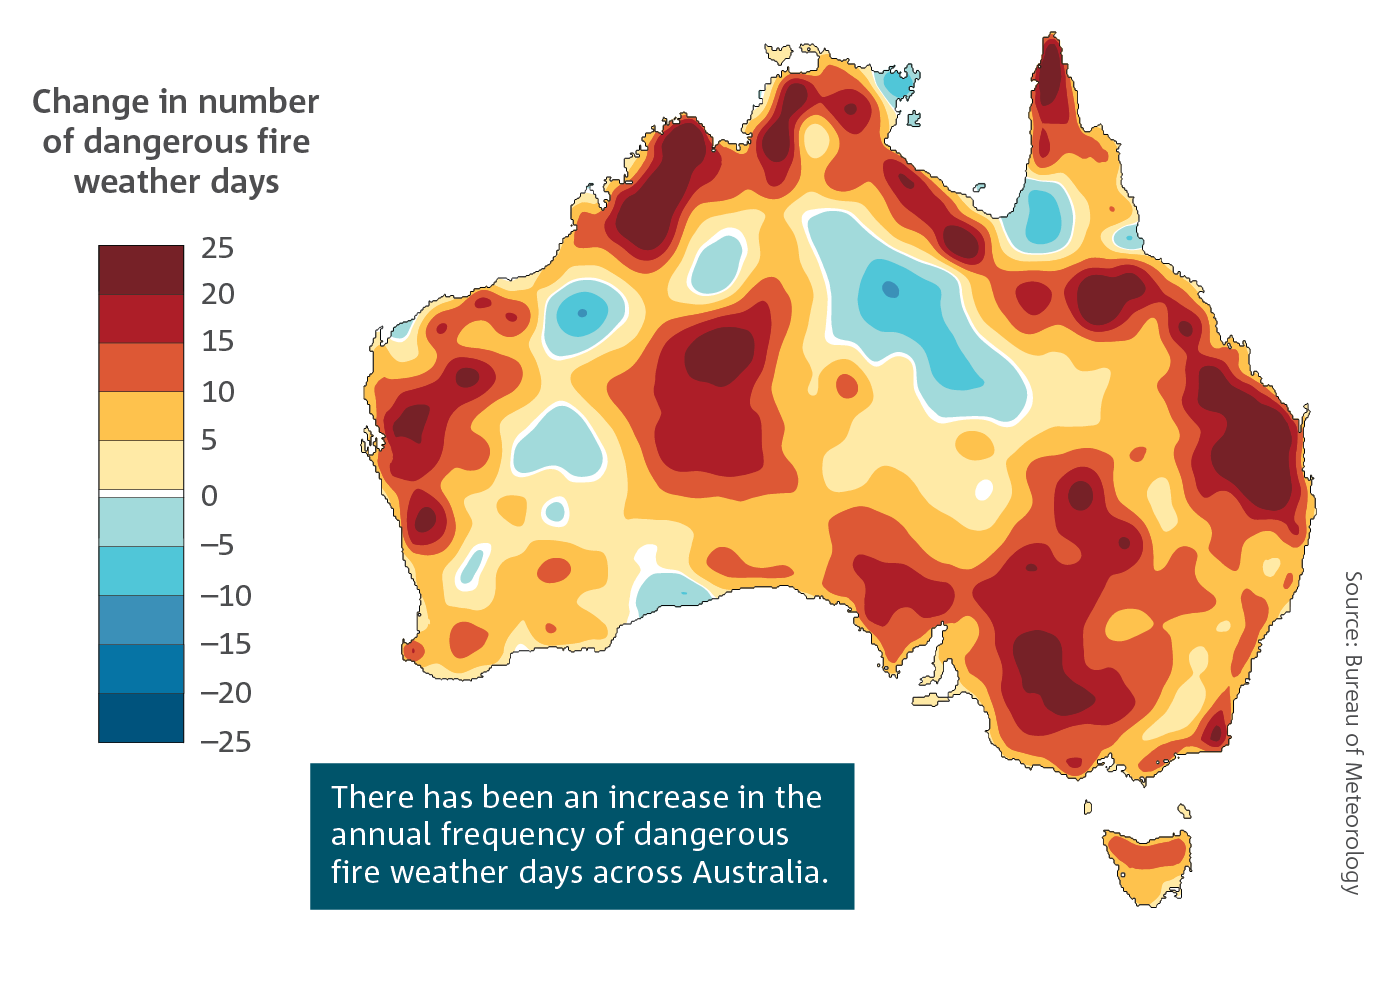 Map showing the change in number of dangerous fire weather days in Australia from -25 days to +25 days. Most of the country shows an increase in the number of days, with large areas in the 10 to 25 day range.